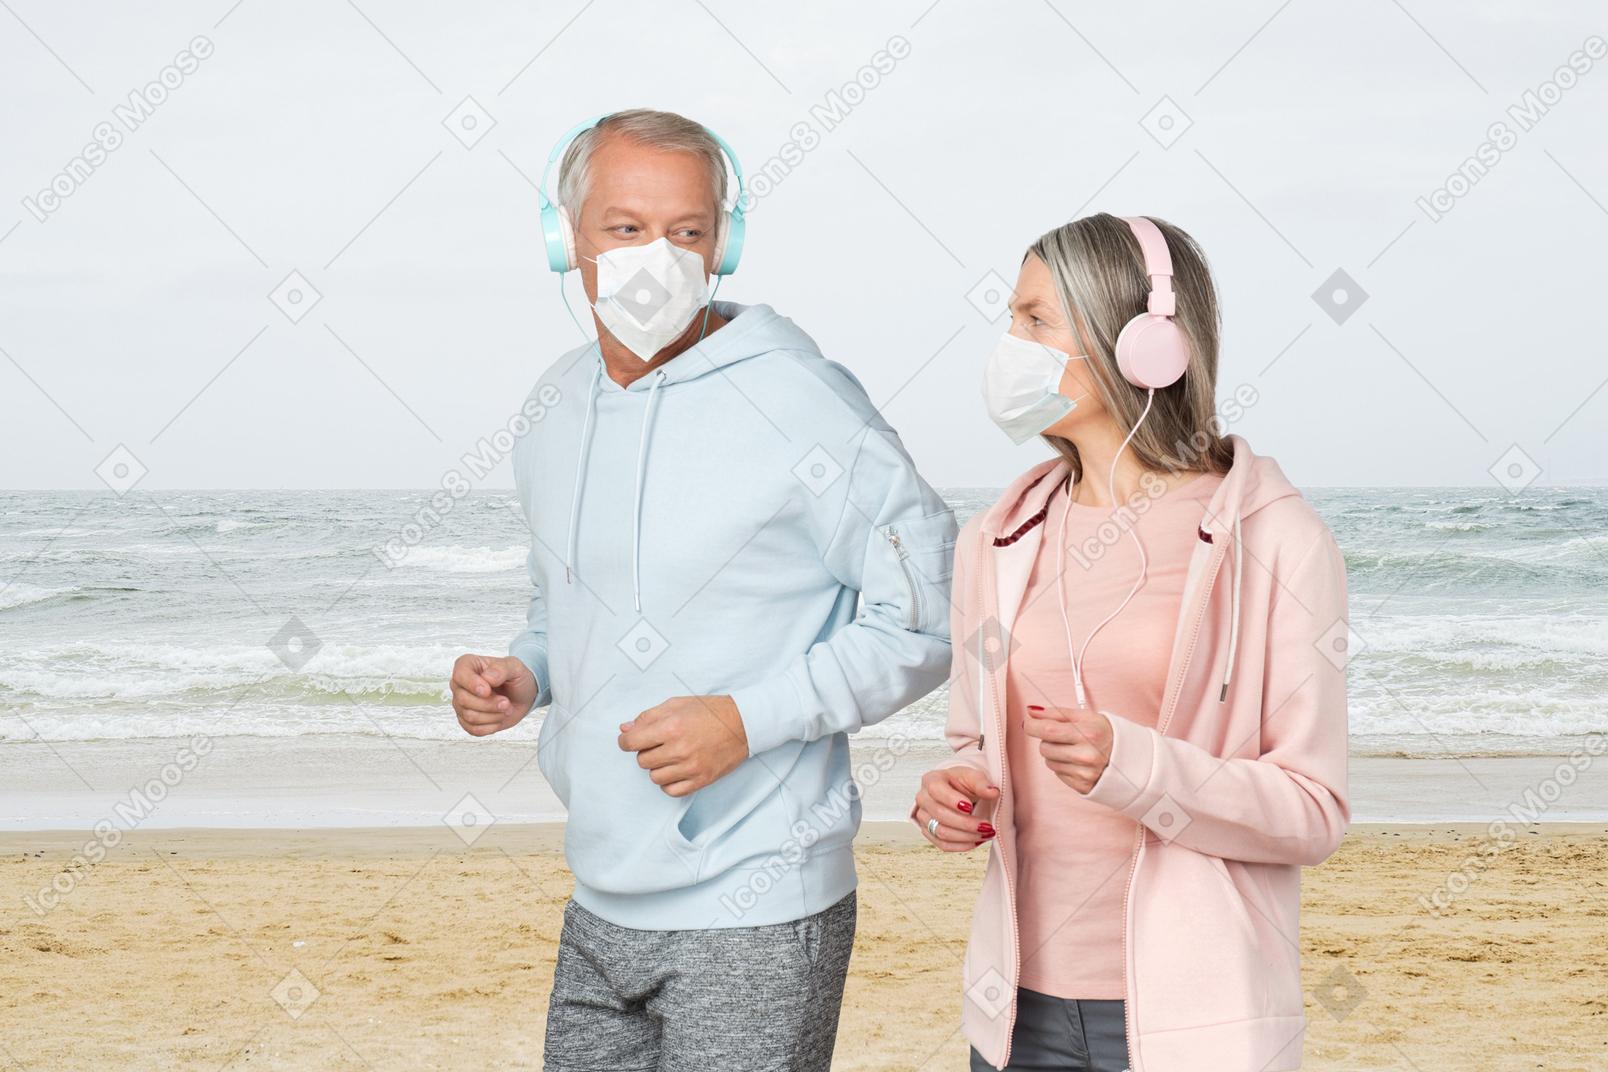 Old man and old woman running on a beach with face masks on